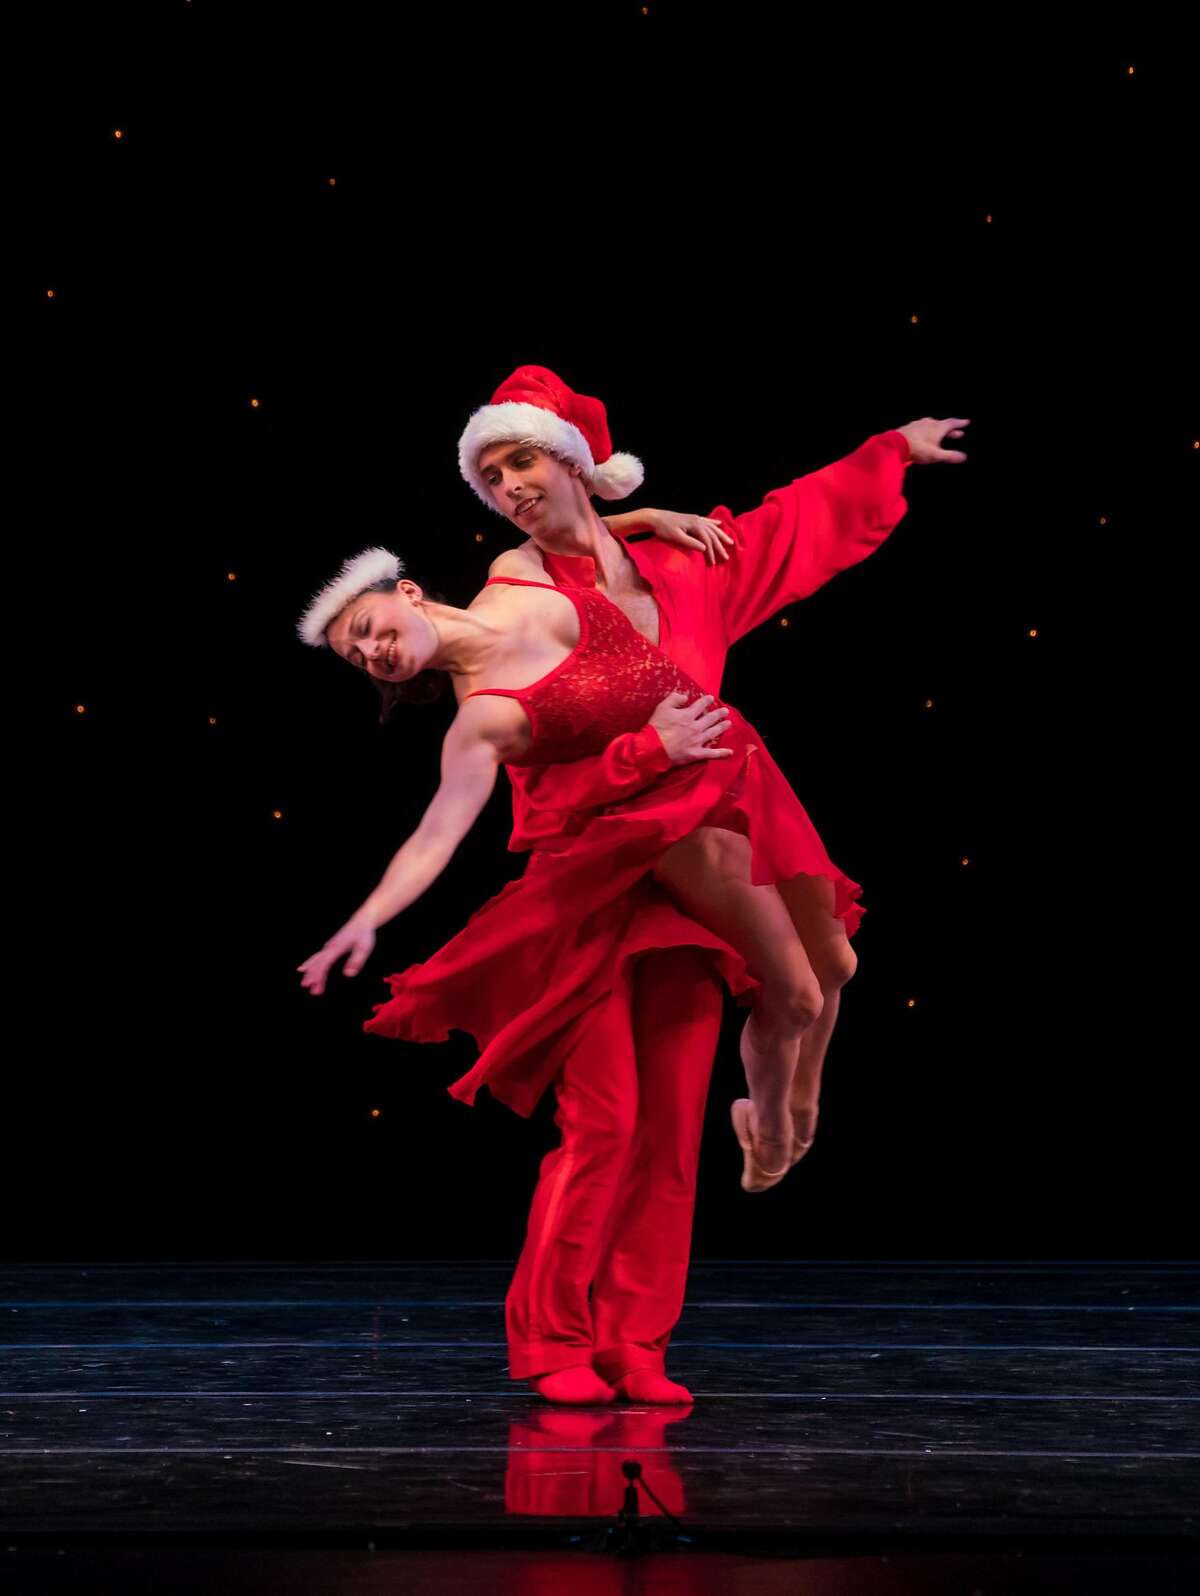 Ben Needham-Wood lifts Terez Dean frolic in "White Christmas" - a new work (choreographed by Ben Needham-Wood after Michael Smuin) for Smuin's annual The Christmas Ballet, playing through Dec. 24 in Walnut Creek, Carmel, Mountain View, and San Francisco. Photo credit: Keith Sutter